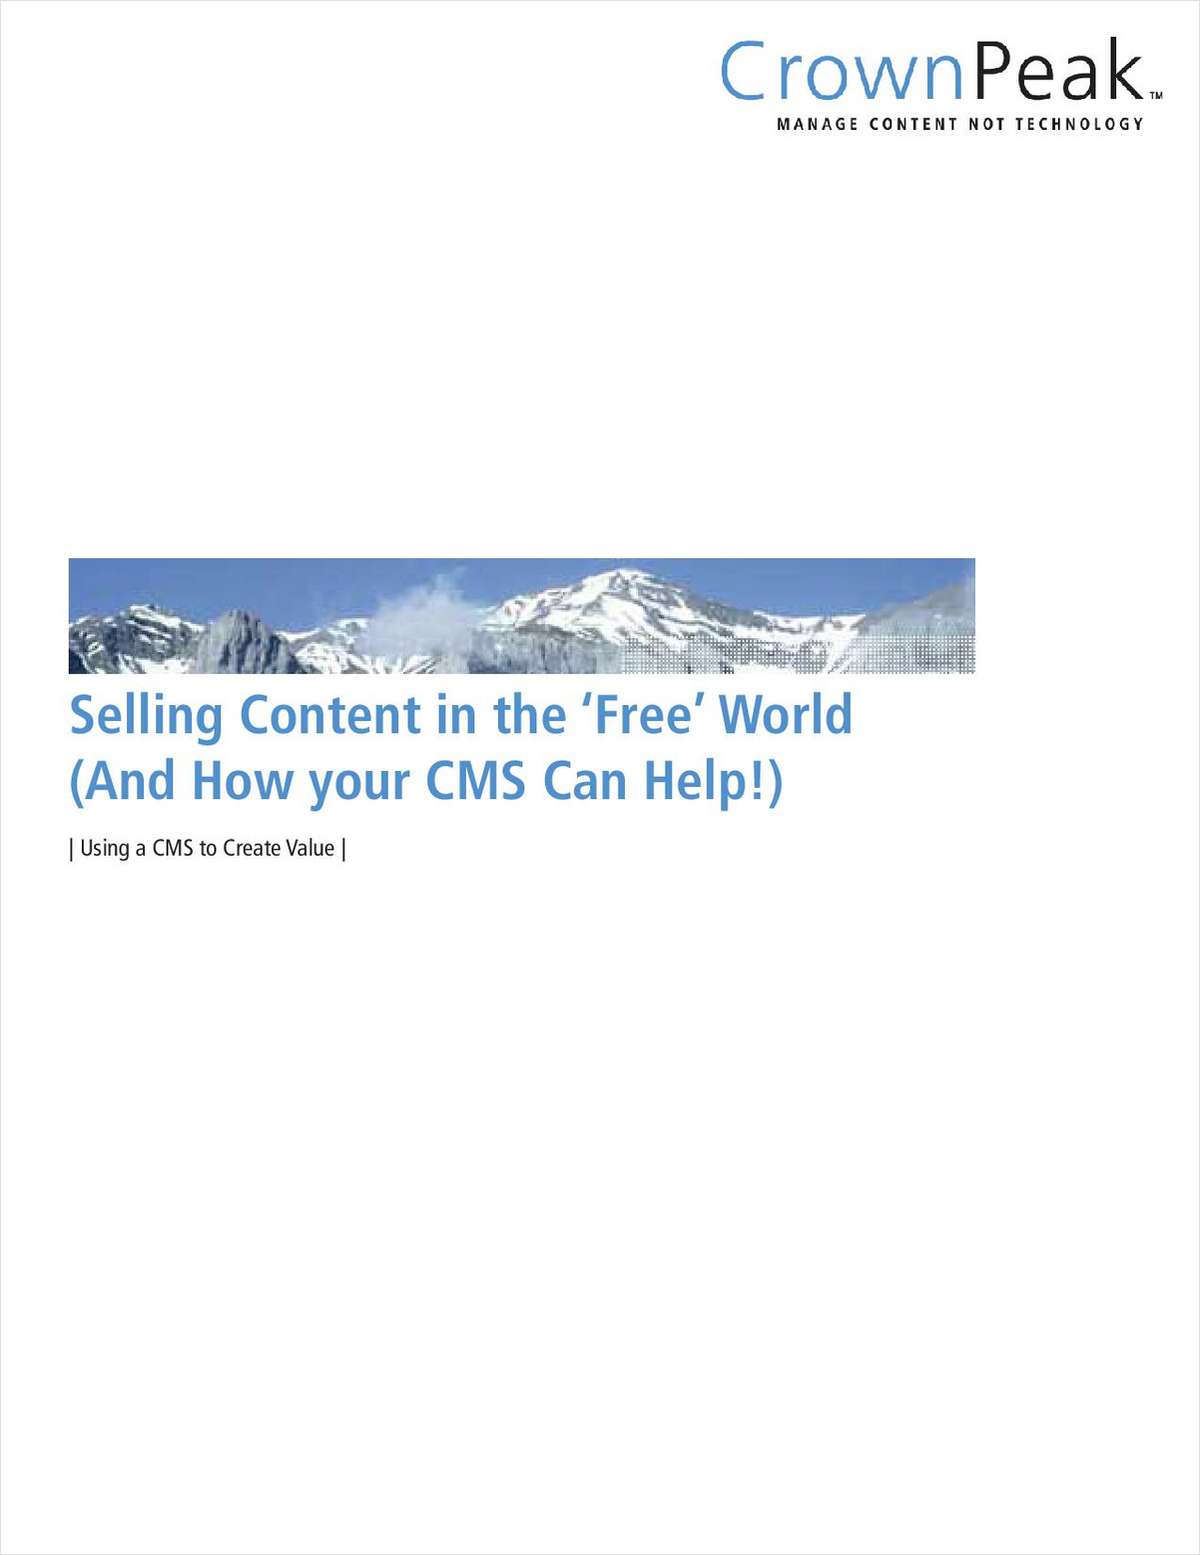 Selling Content in the 'Free World' and How your CMS Can Help!